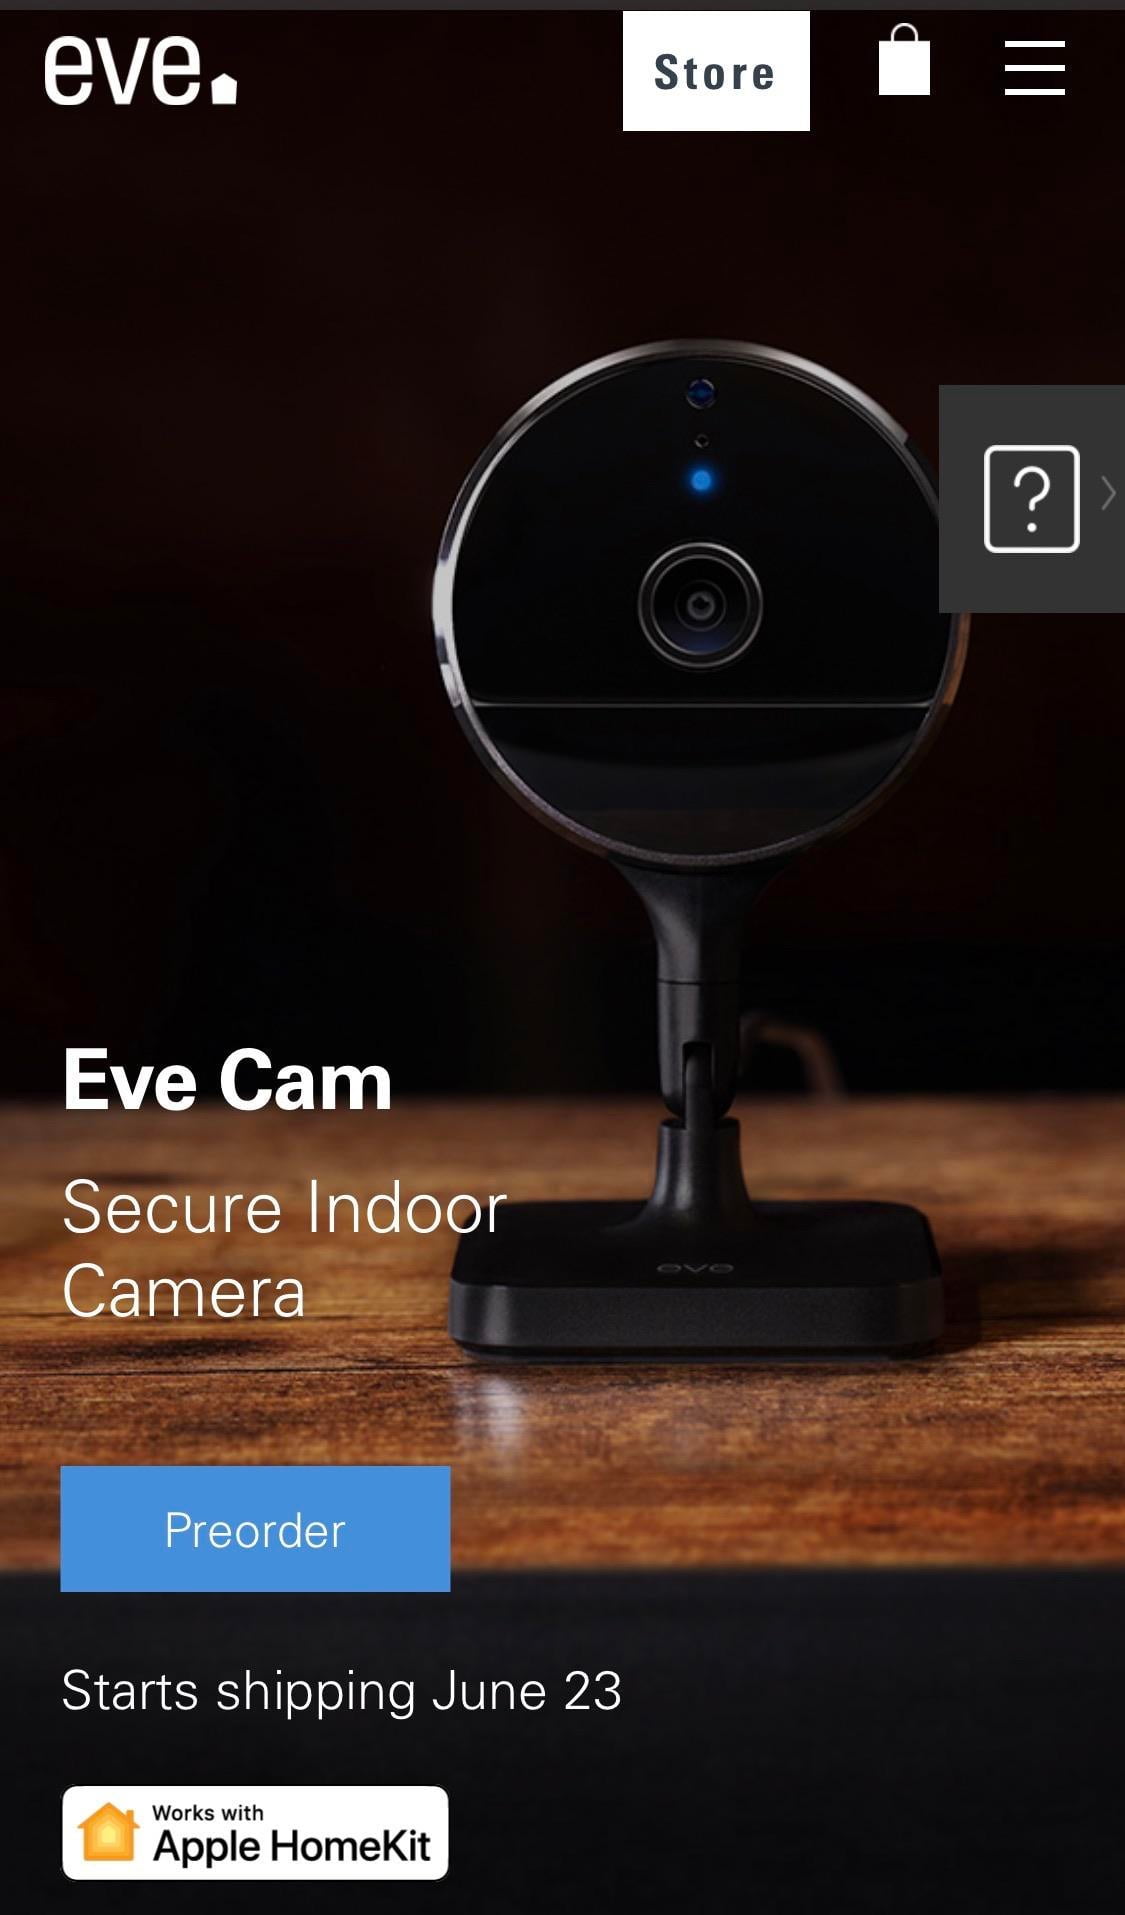 Eve Cam is now available for pre order